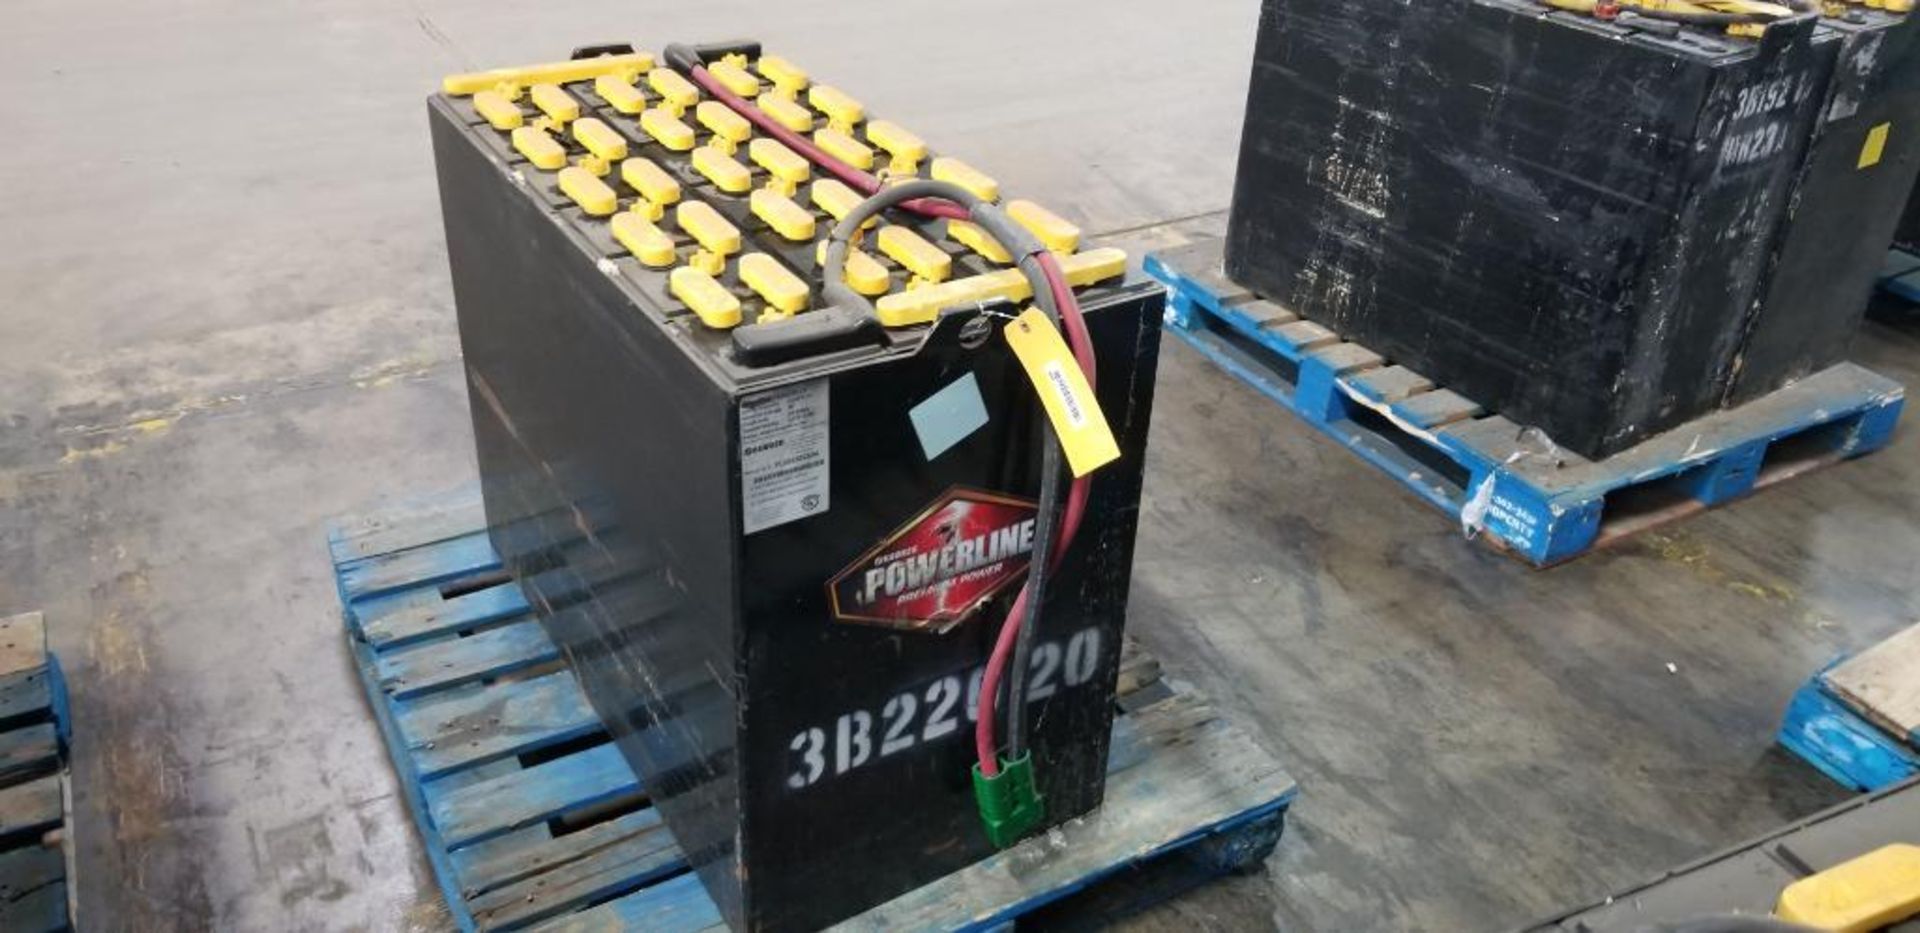 Hawker Powerline Battery, EO-583, 36v, 1000A.H., Battery Weight: 2,780 LB., 38" L x 20" W x 31" H ($